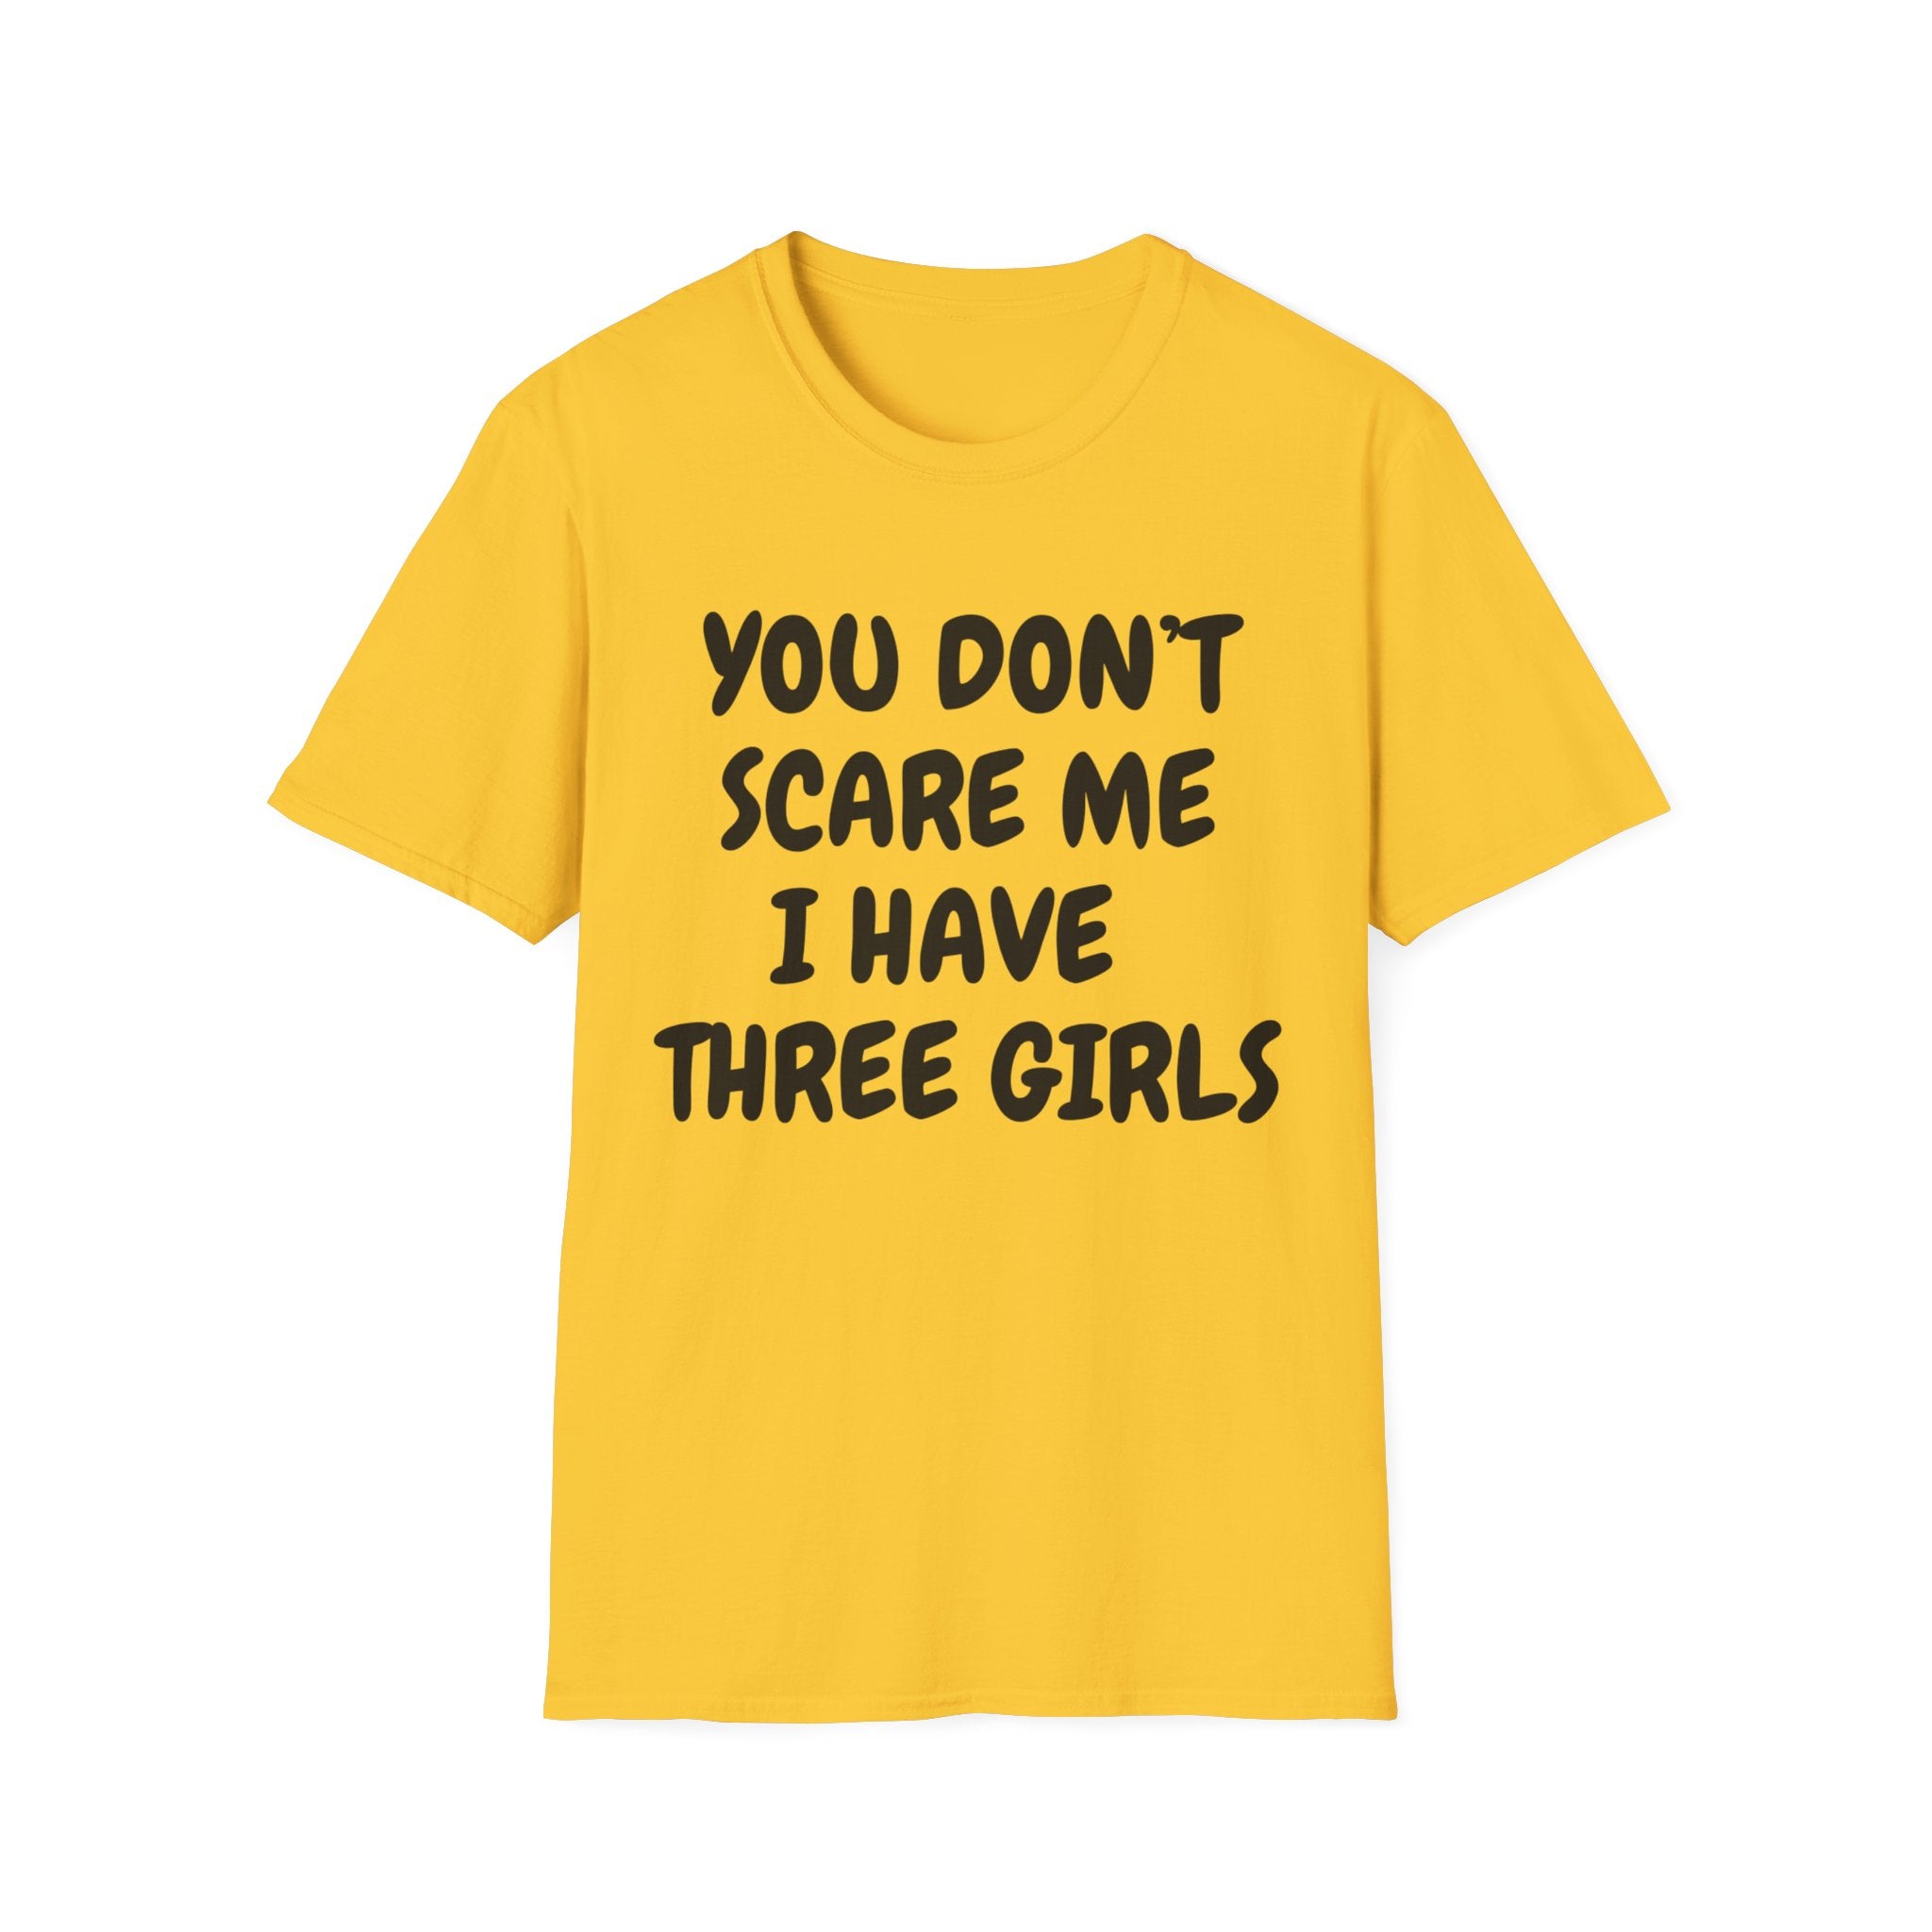 You Don't Scare Me I have Three Girls Funny Dad T-shirt, Father's Day Gift, Gift for Dad, Dad Shirt, Men's T-shirt